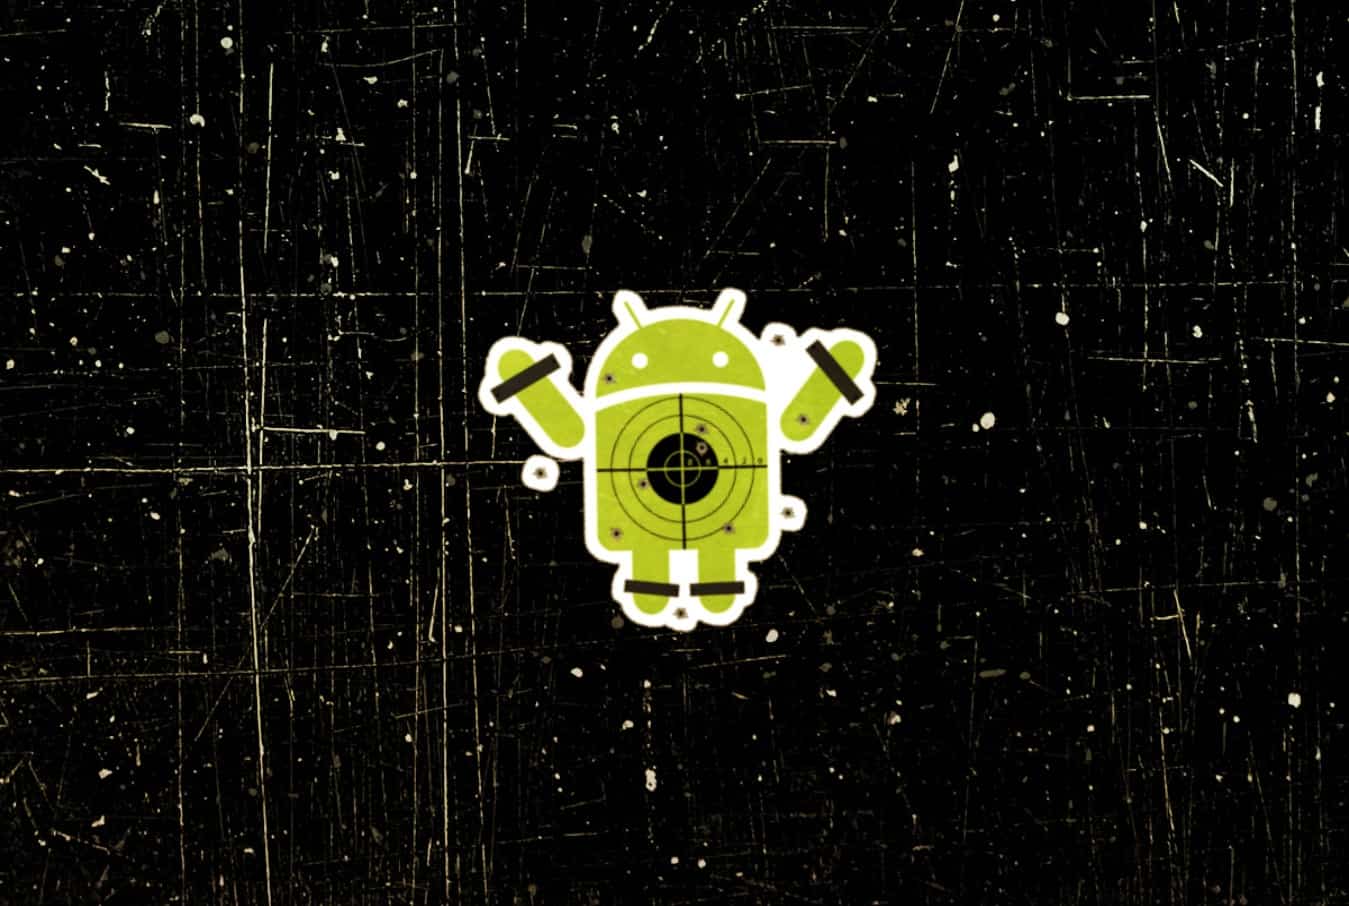 Fake reviews & third-party apps cause 50% of threats against Android devices